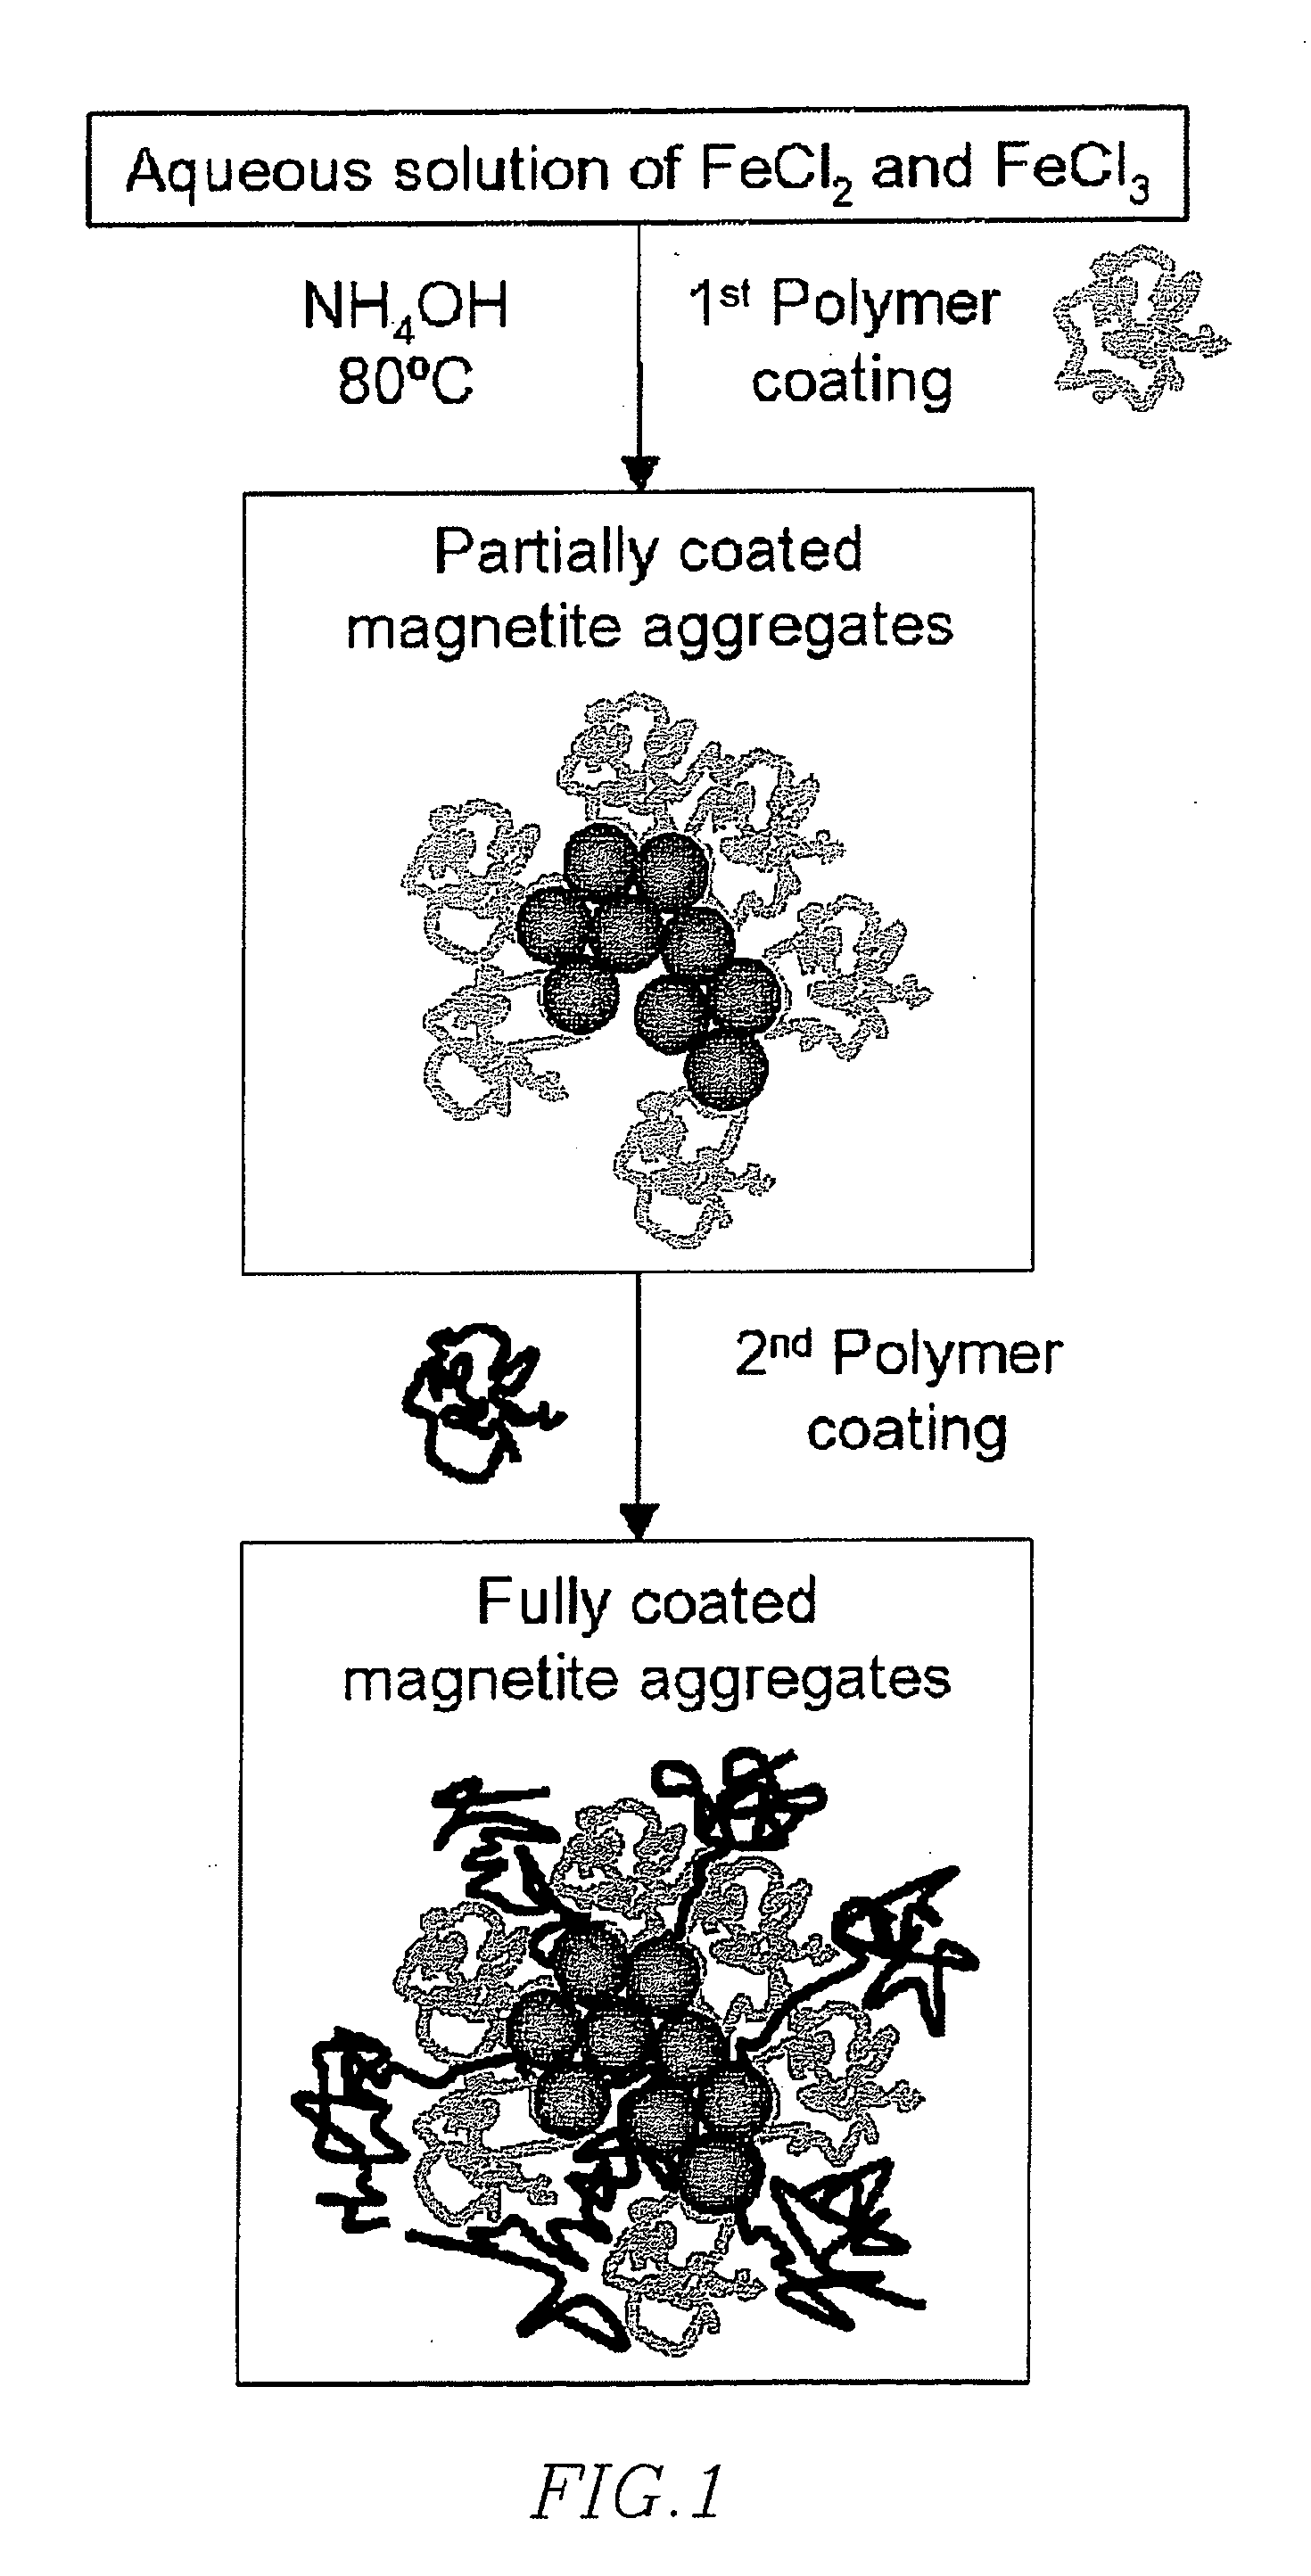 Multi-polymer-coated magnetic nanoclusters